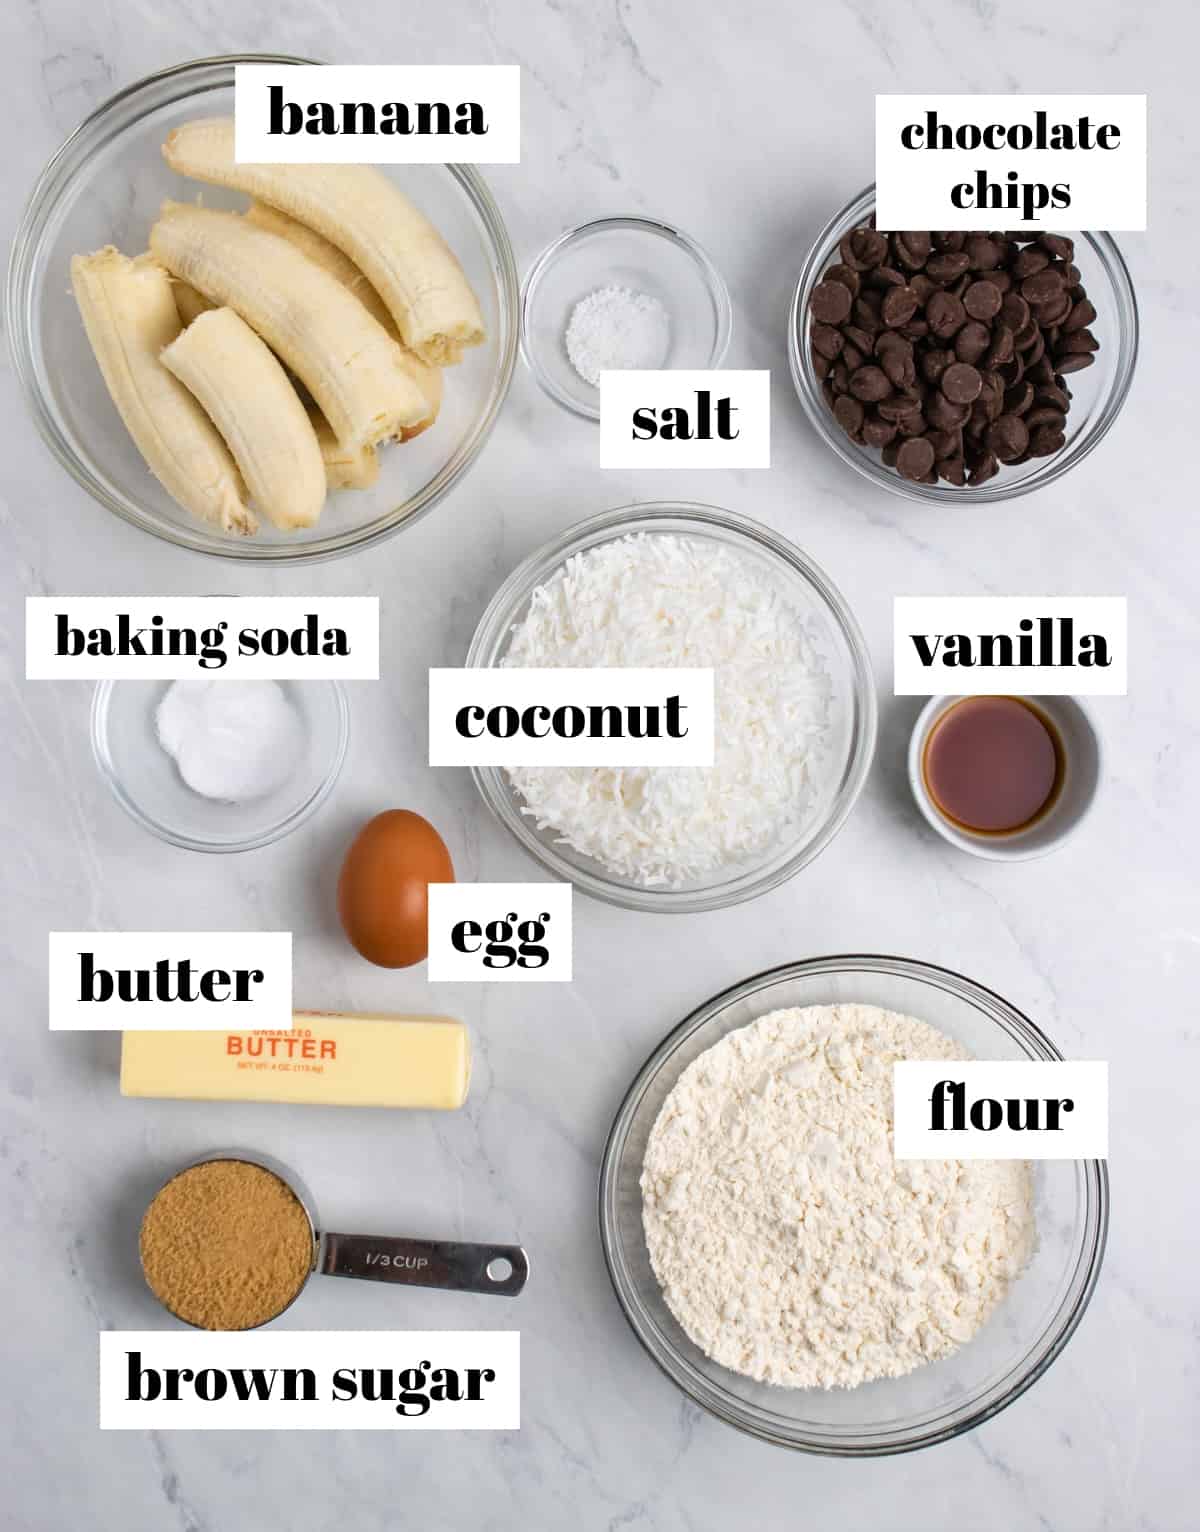 Flour, chocolate chips, banana, butter and other ingredients labeled on counter.